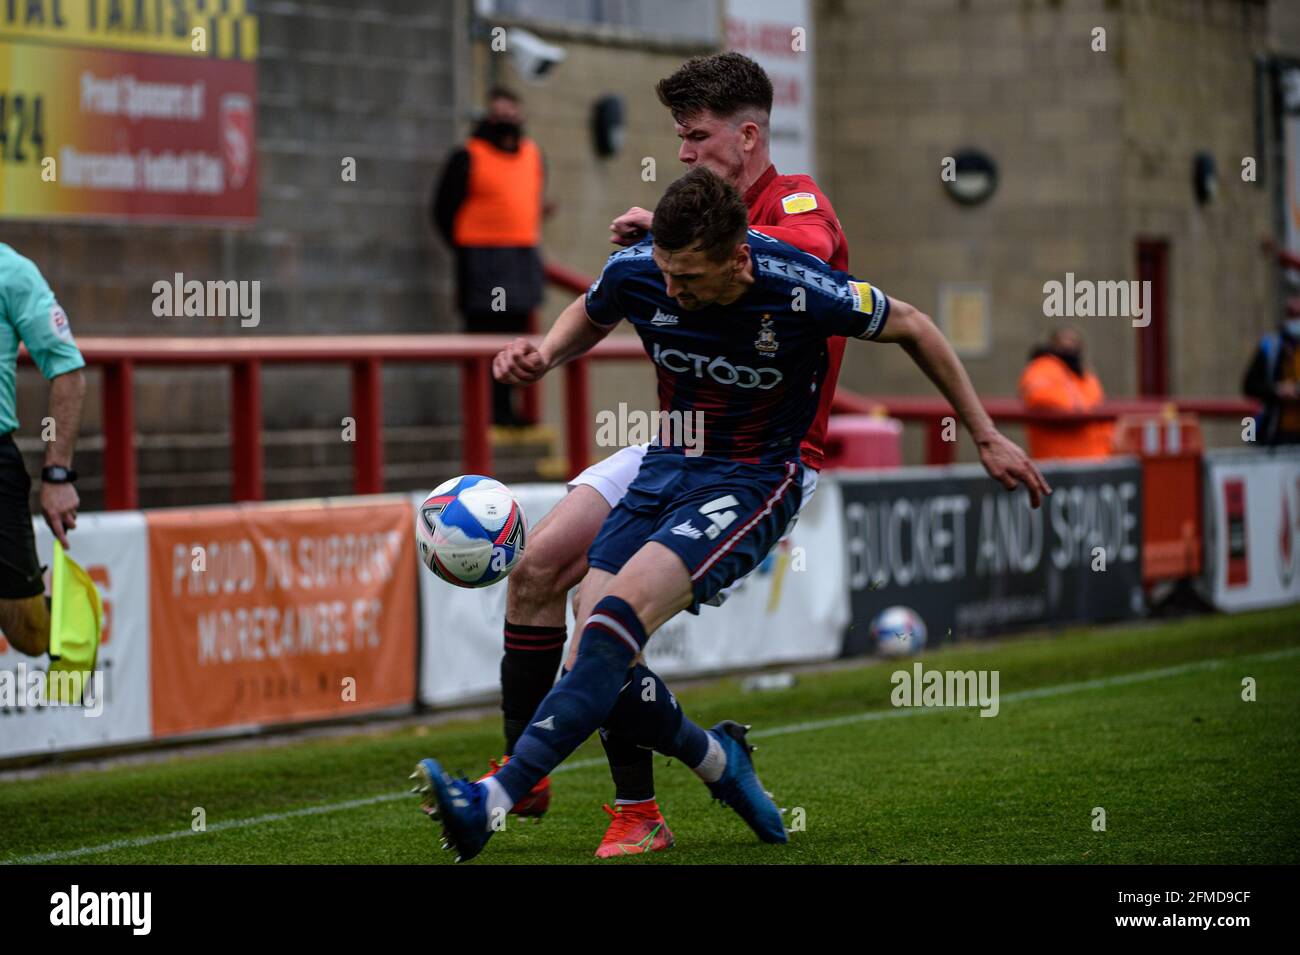 MORECAMBE, UK. MAY 8TH. Paudie O'Connor of Bradford City FC tackles Liam McAlinden of Morecambe FC during the Sky Bet League 2 match between Morecambe and Bradford City at the Globe Arena, Morecambe on Saturday 8th May 2021. (Credit: Ian Charles | MI News) Credit: MI News & Sport /Alamy Live News Stock Photo